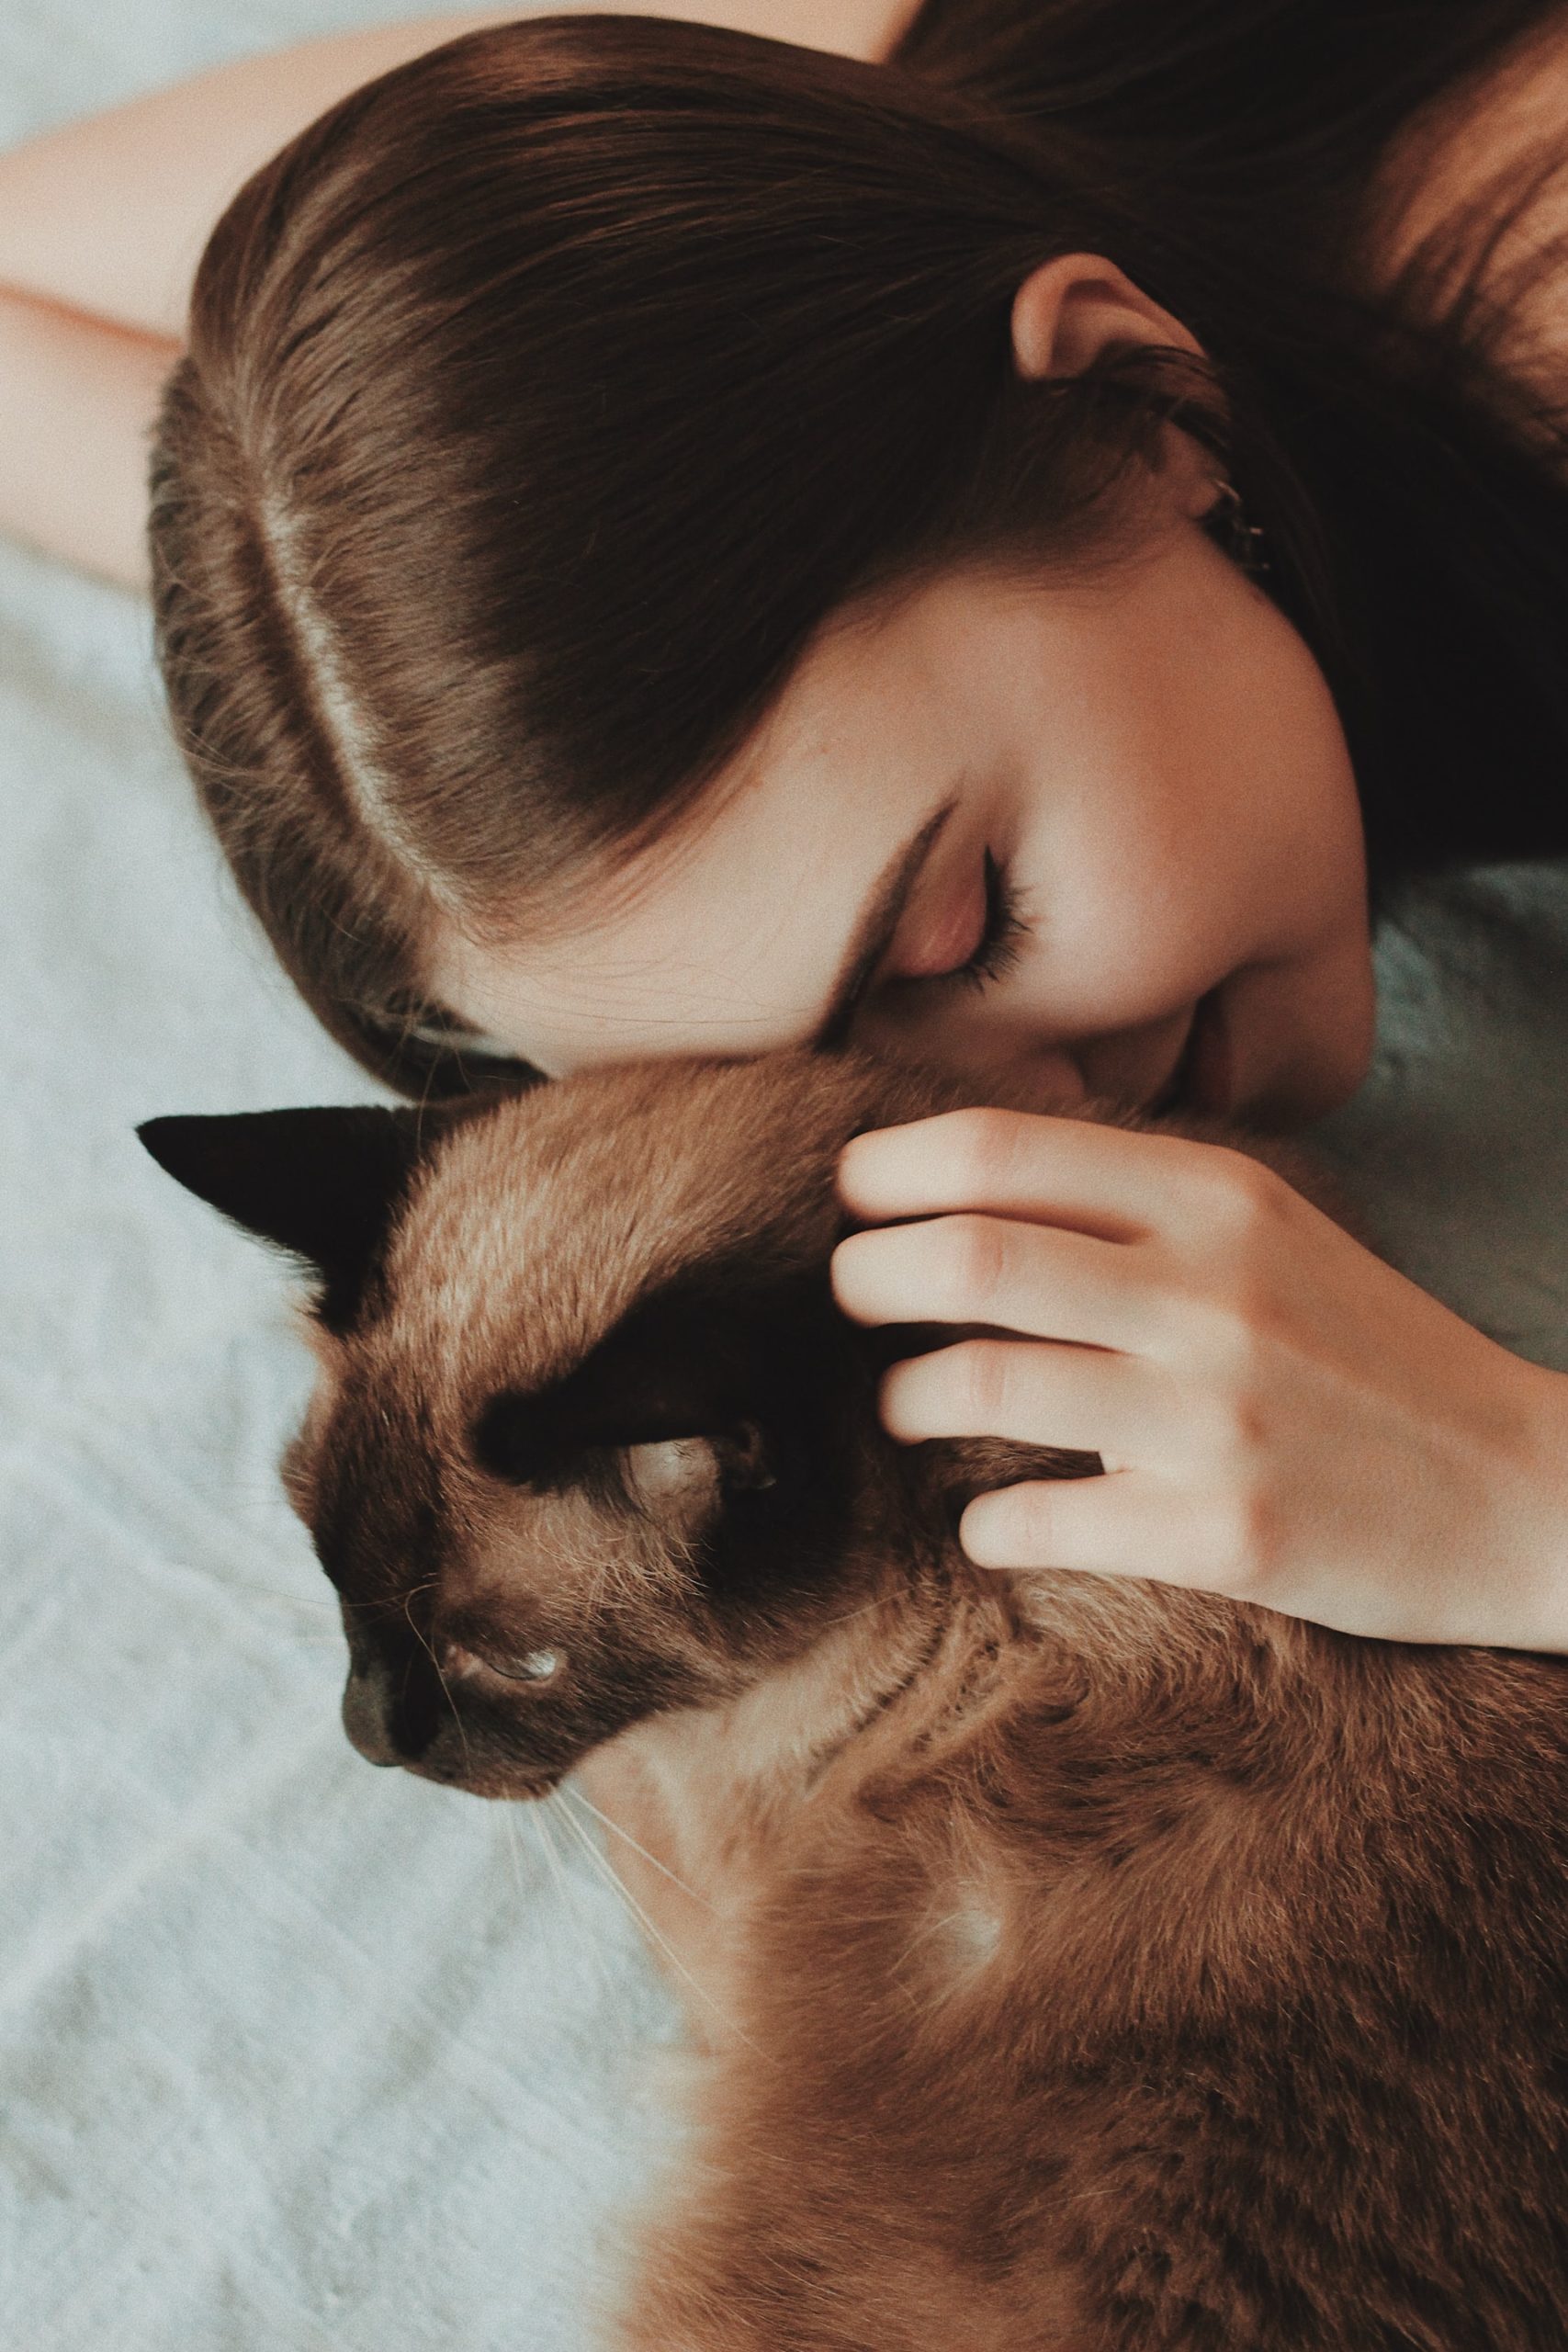 Cuddle with Your Cat - There's Benefits